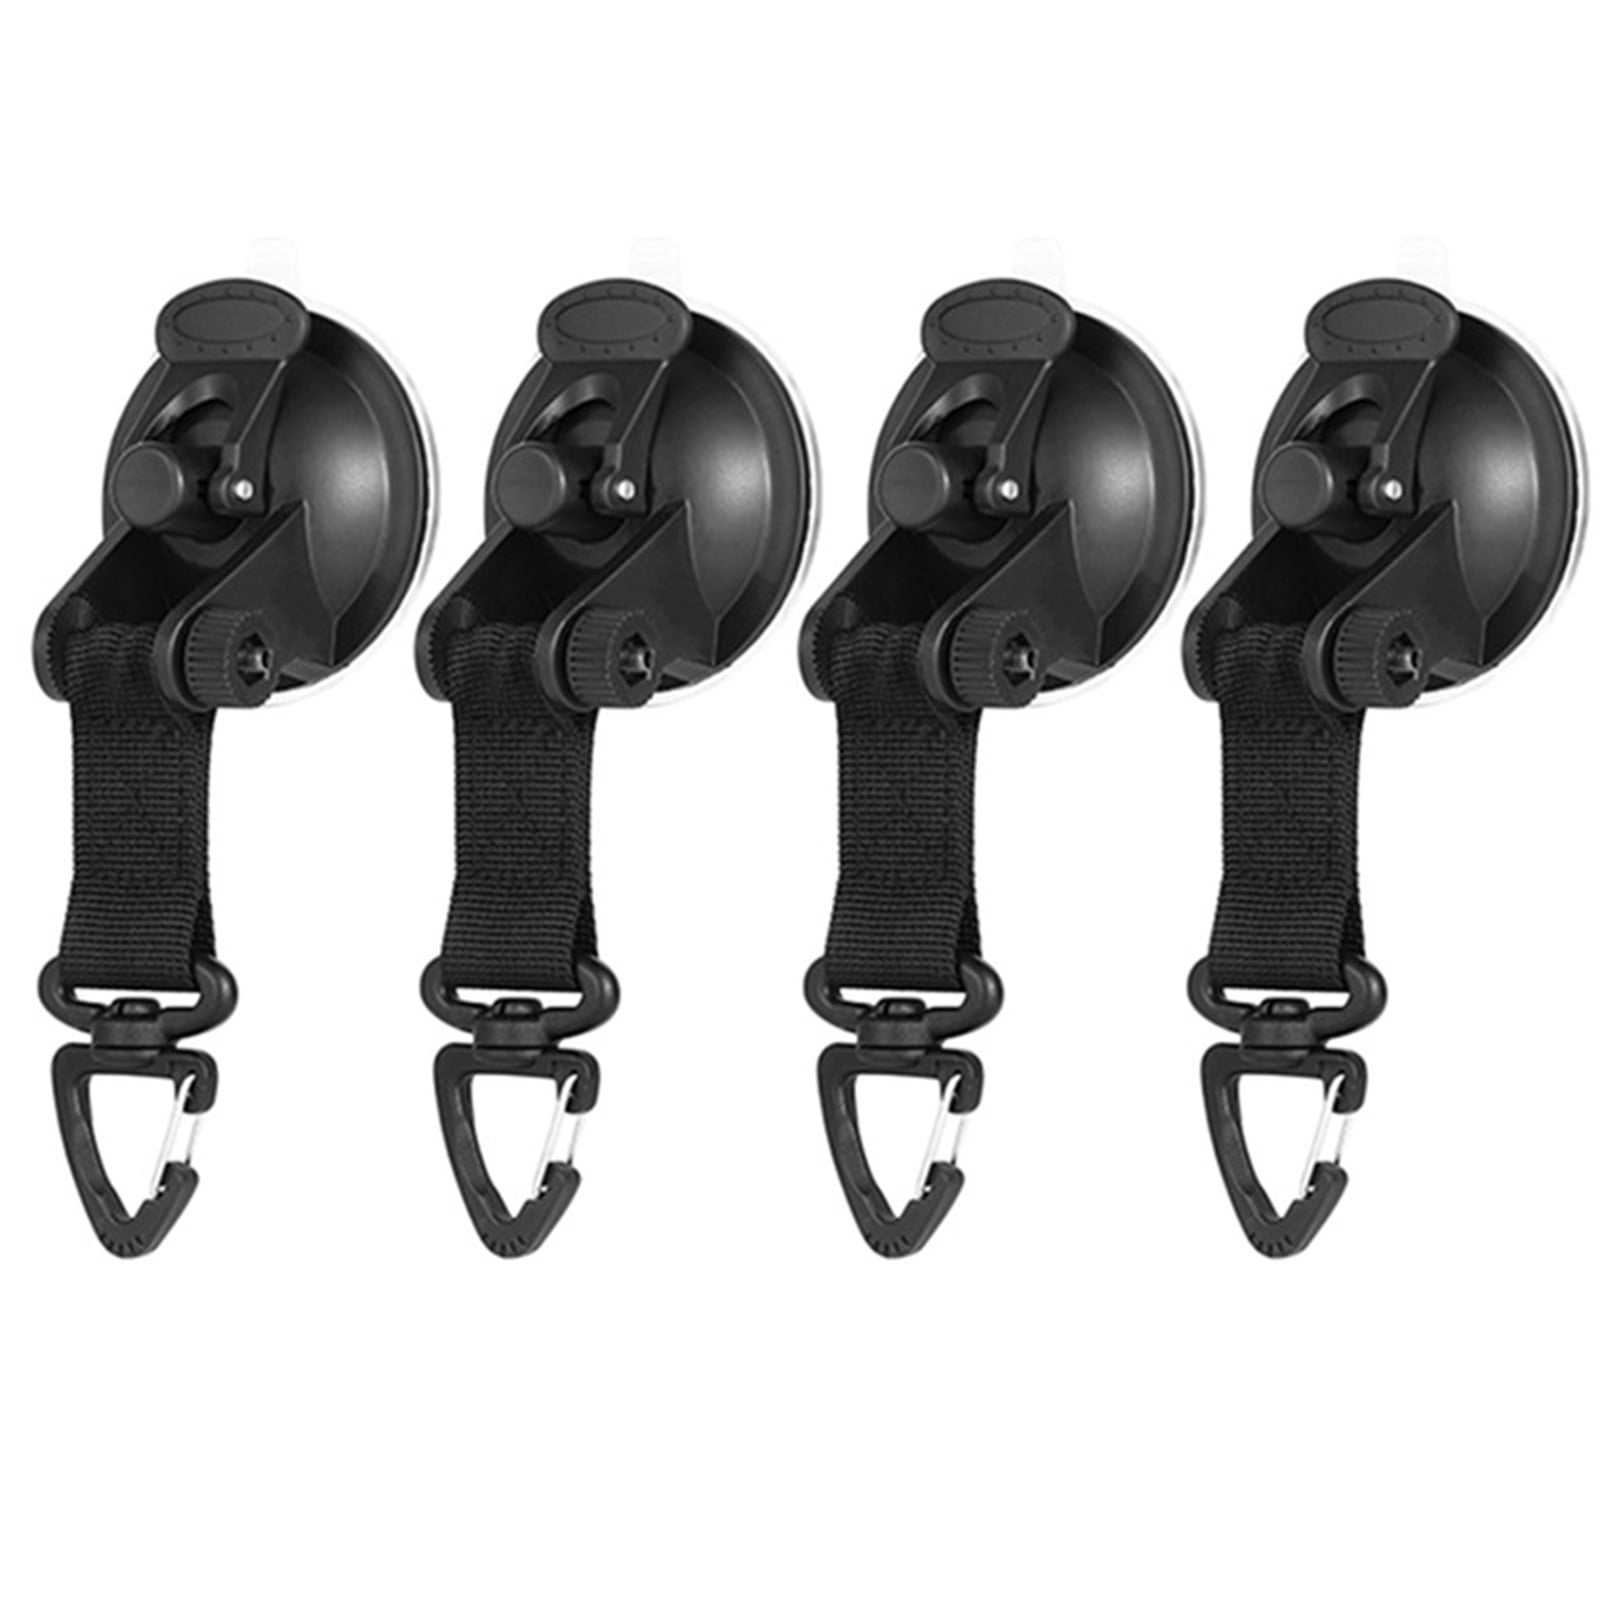 iOPQO Command Hooks Wall Hooks Hook Side With Fixing Cup Awnings Hook ...